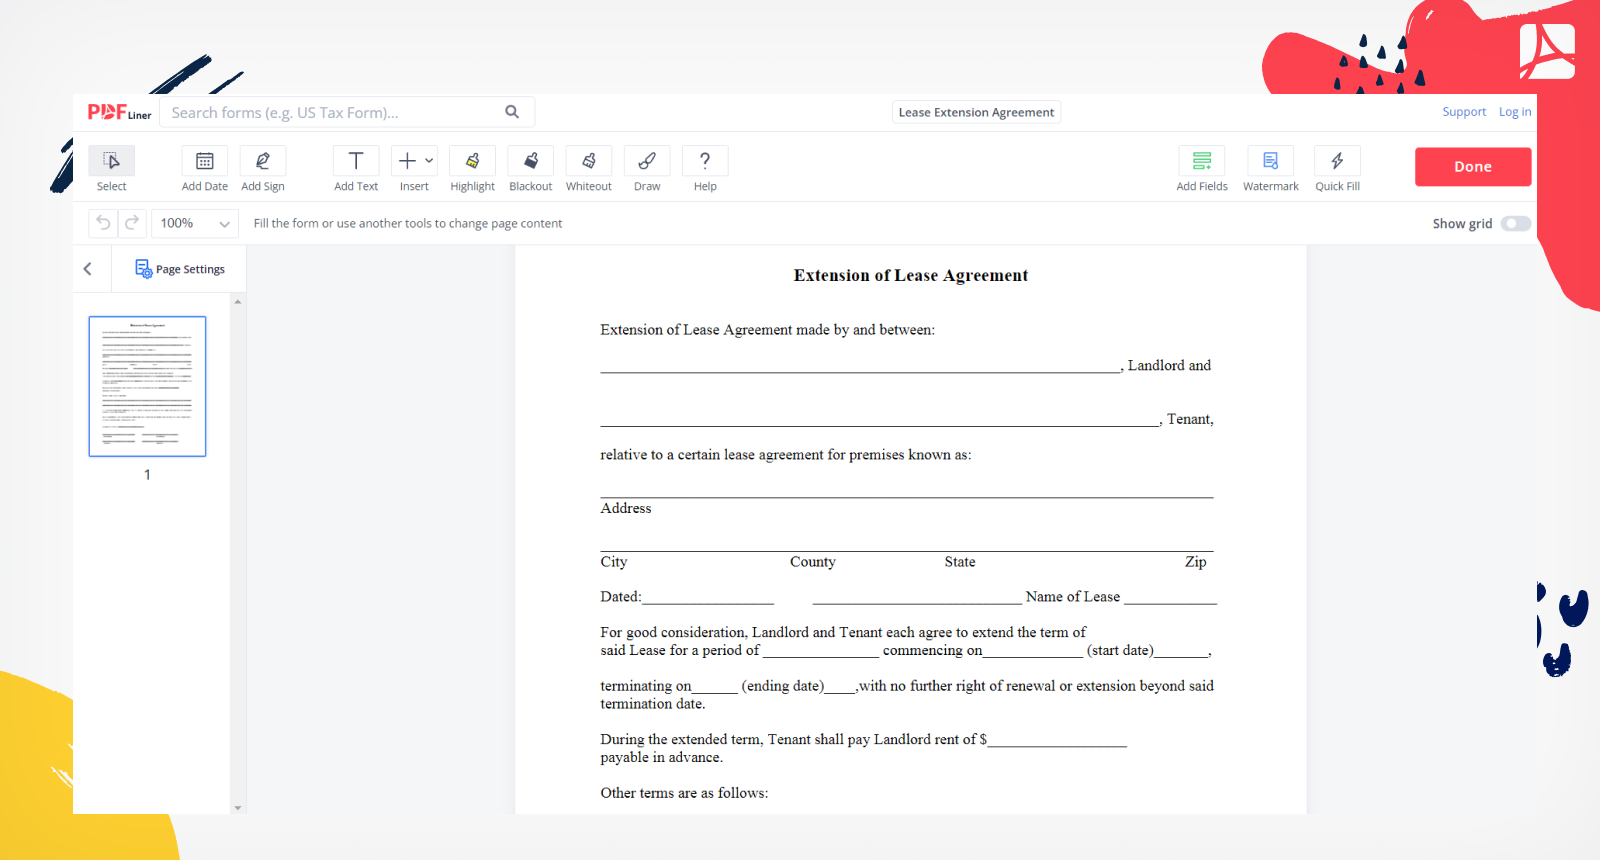 Lease Extension Agreement Form Screenshot